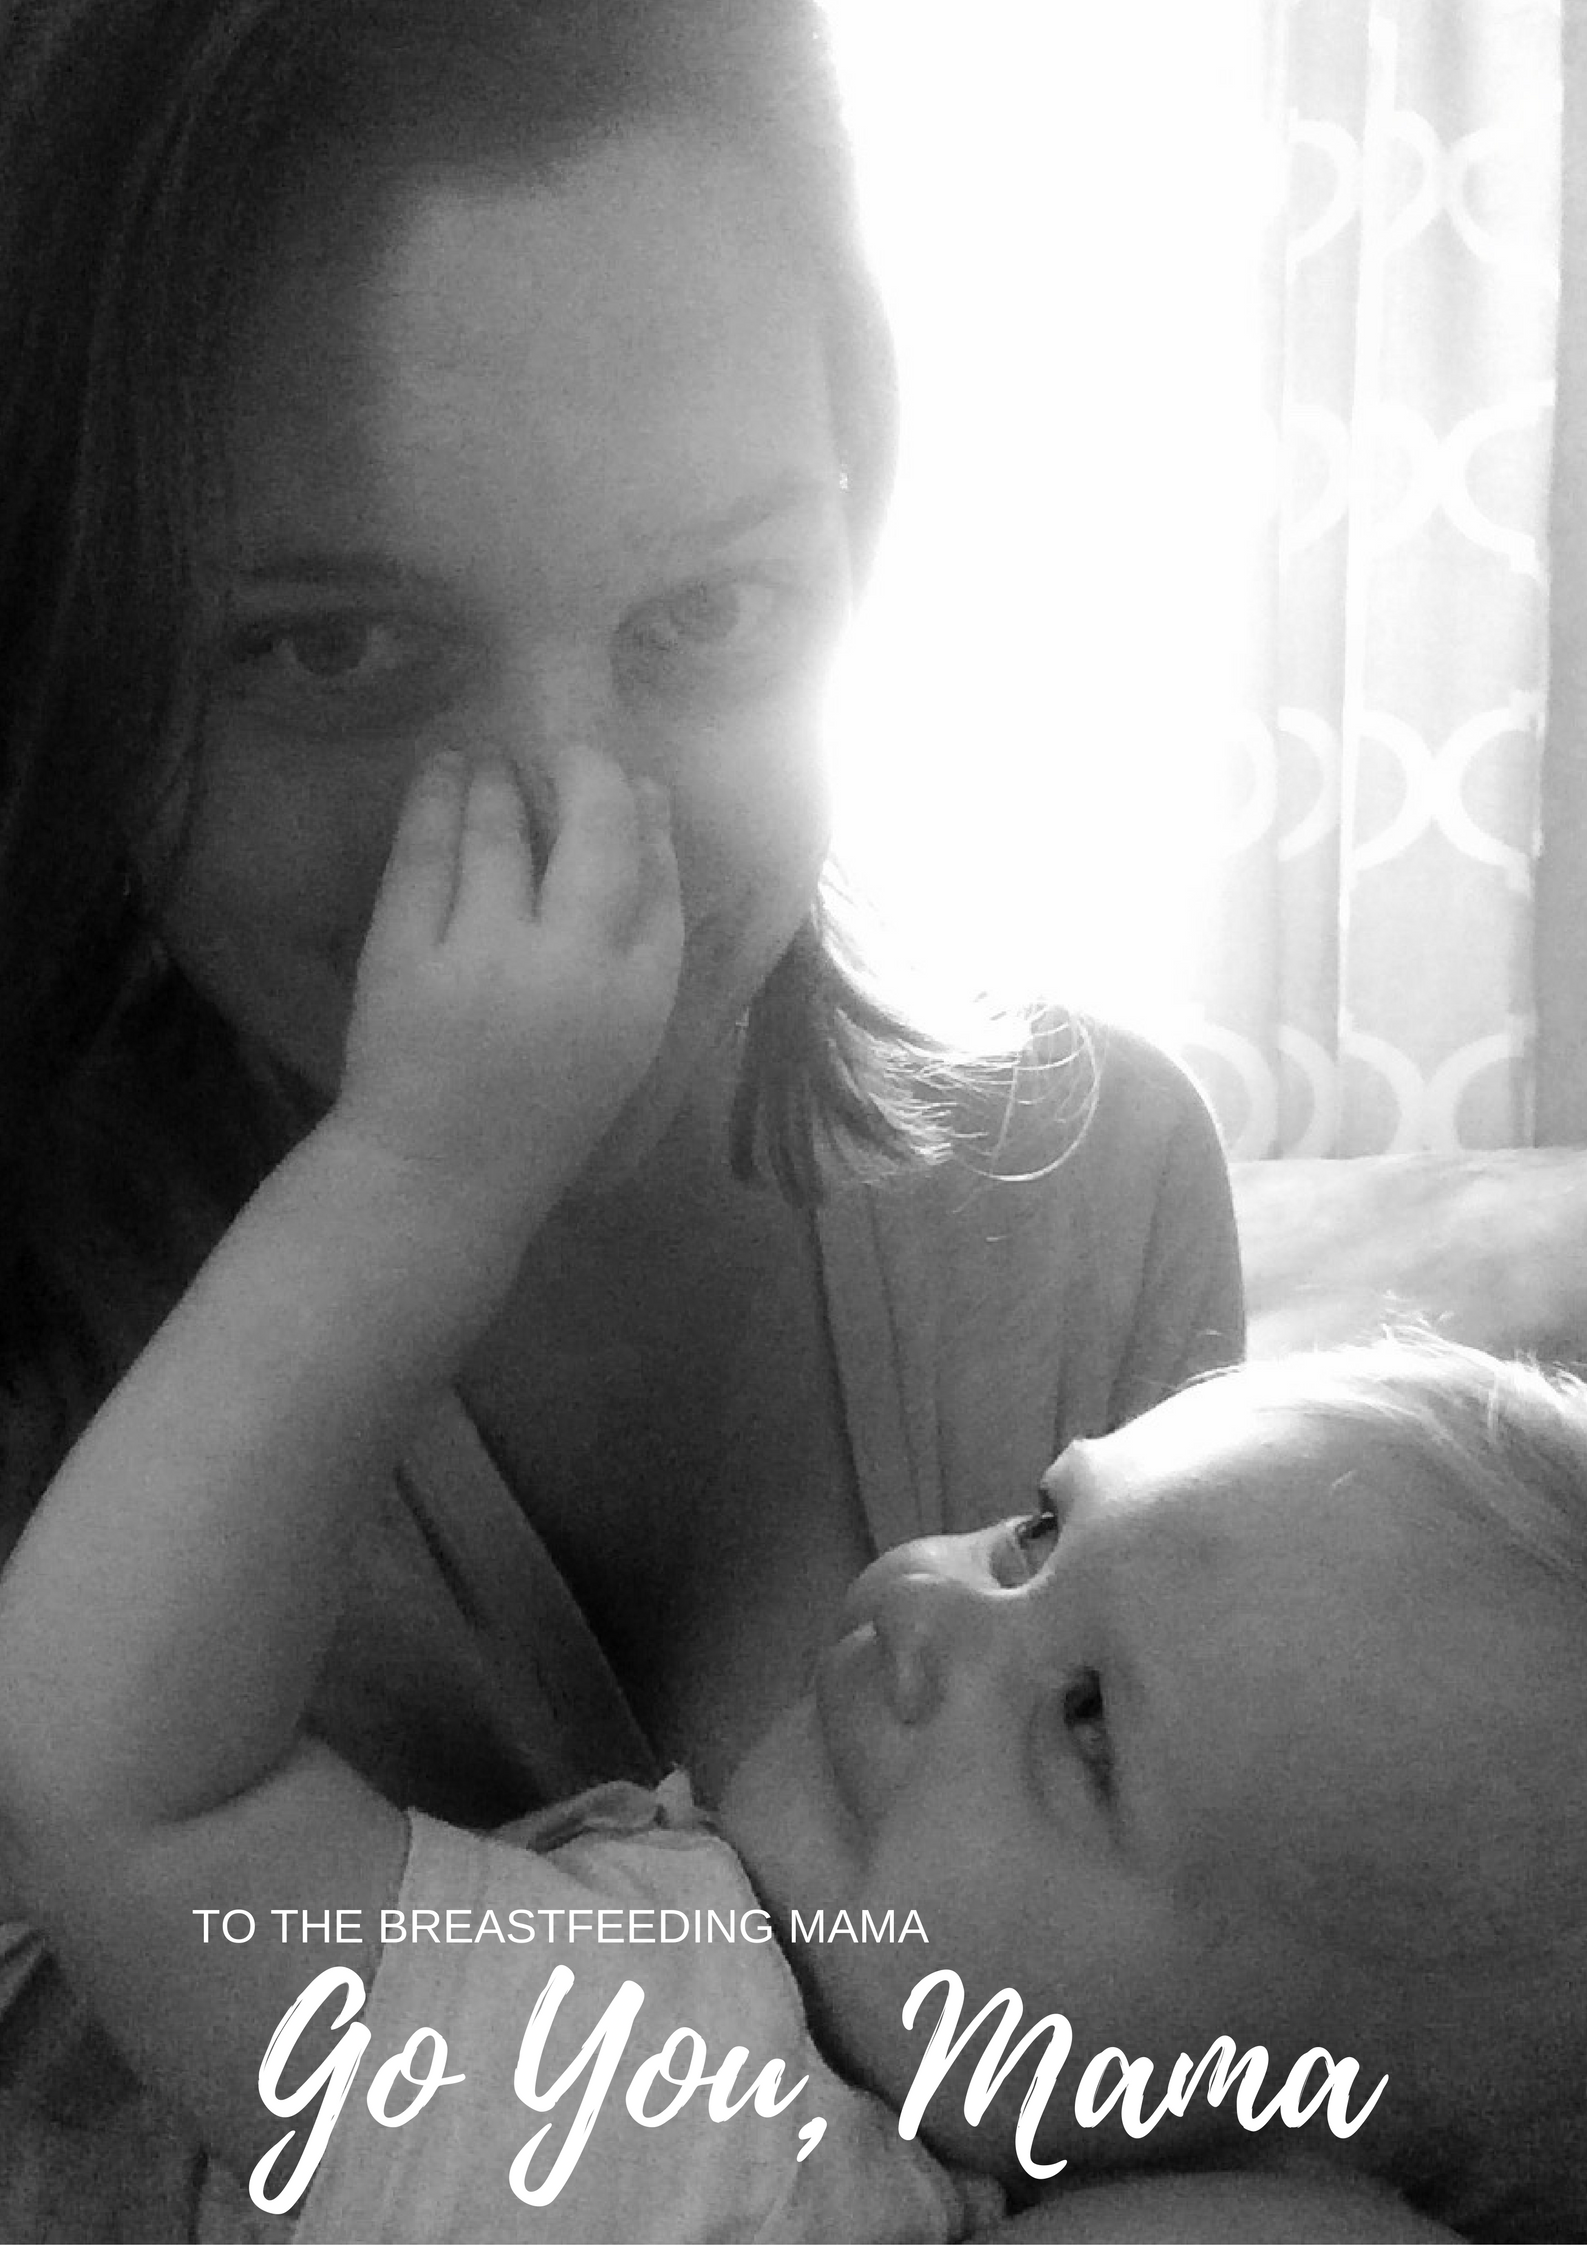 A Note to the Breastfeeding Mama